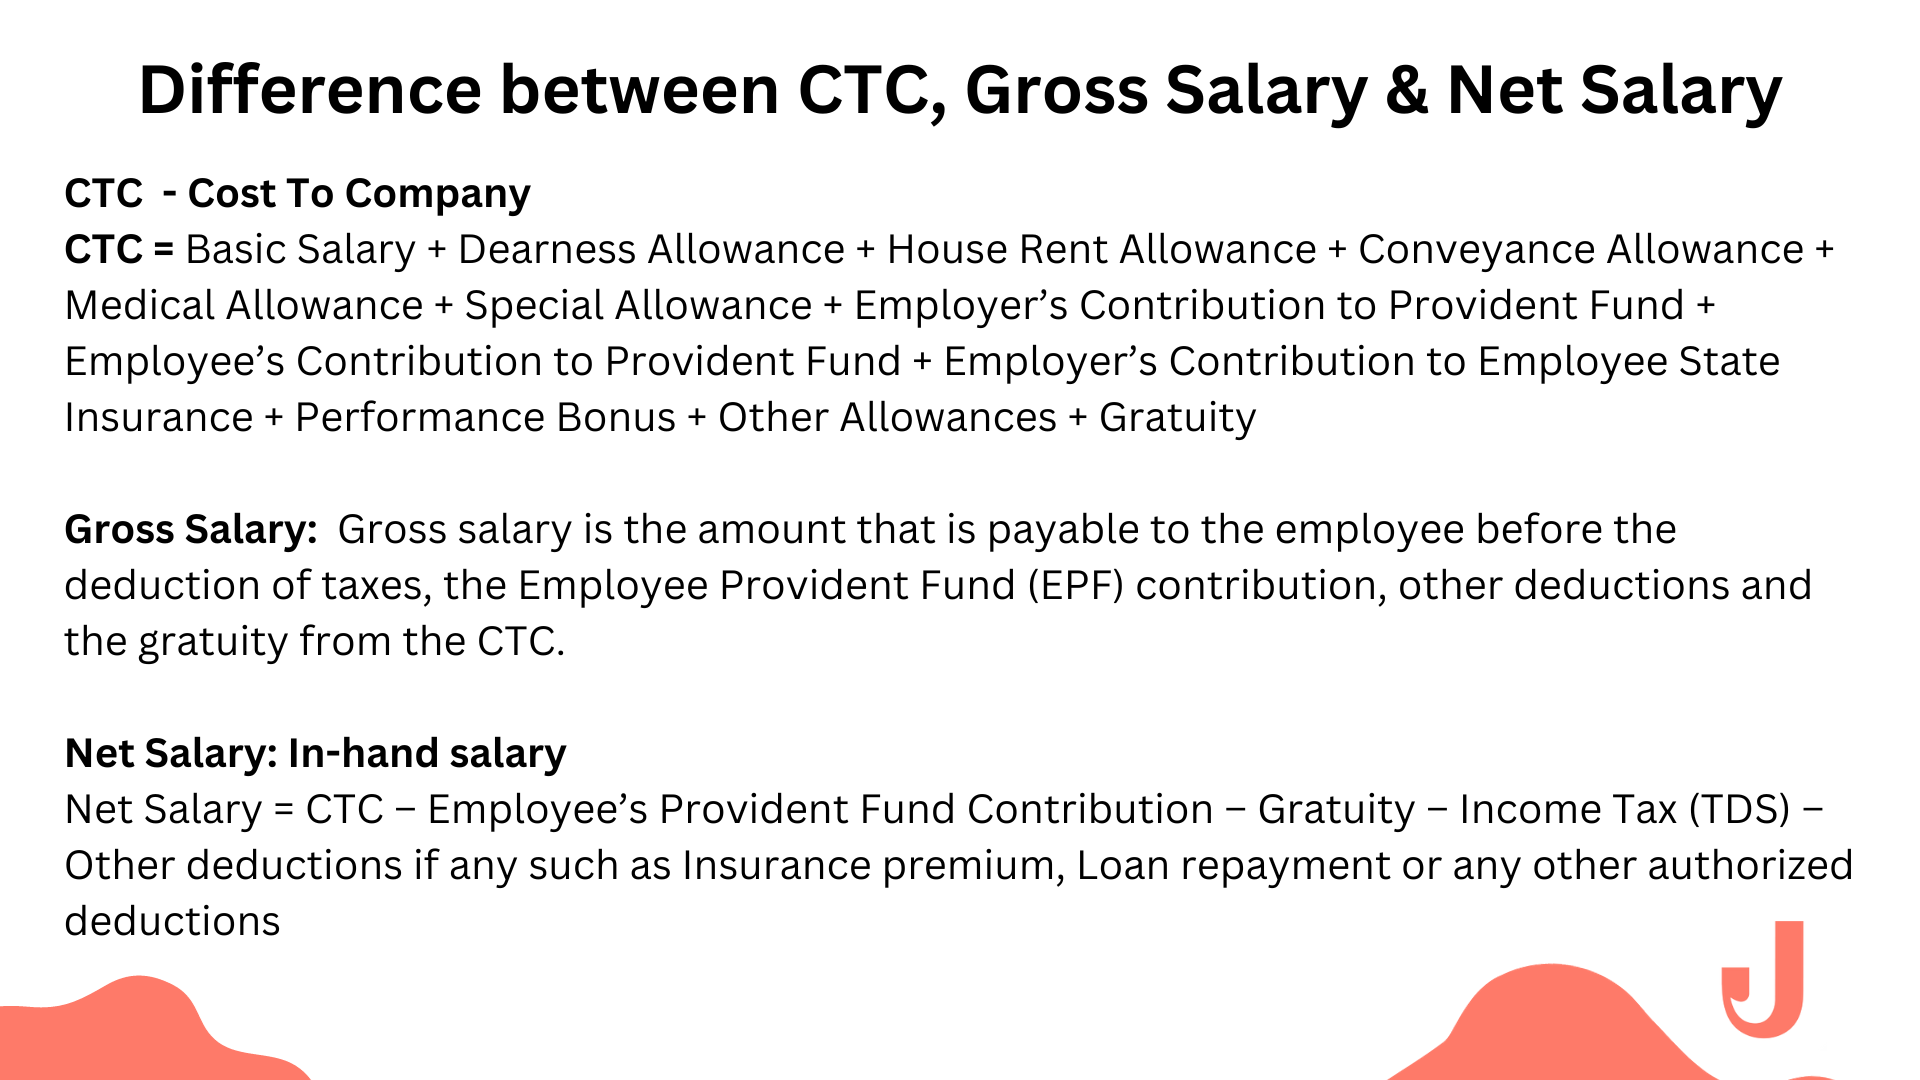 Image showing difference between CTC, gross salary and net salary